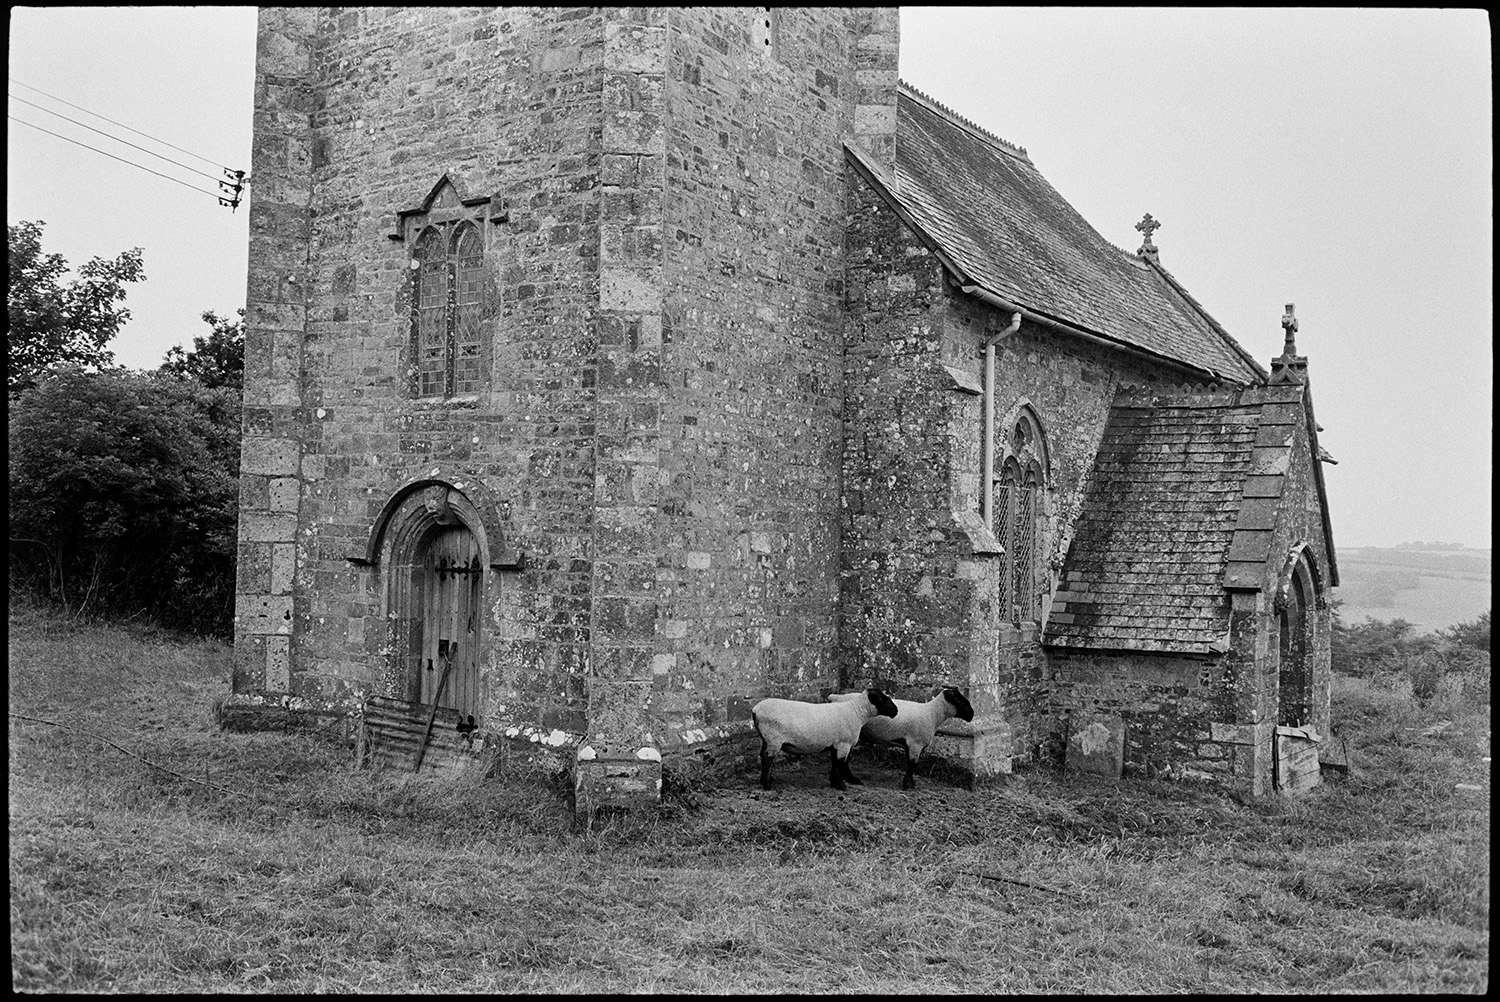 Redundant church, inside and out. 
[Two sheep outside the redundant church at Ashbury, near Northlew. The church porch and windows are visible.]